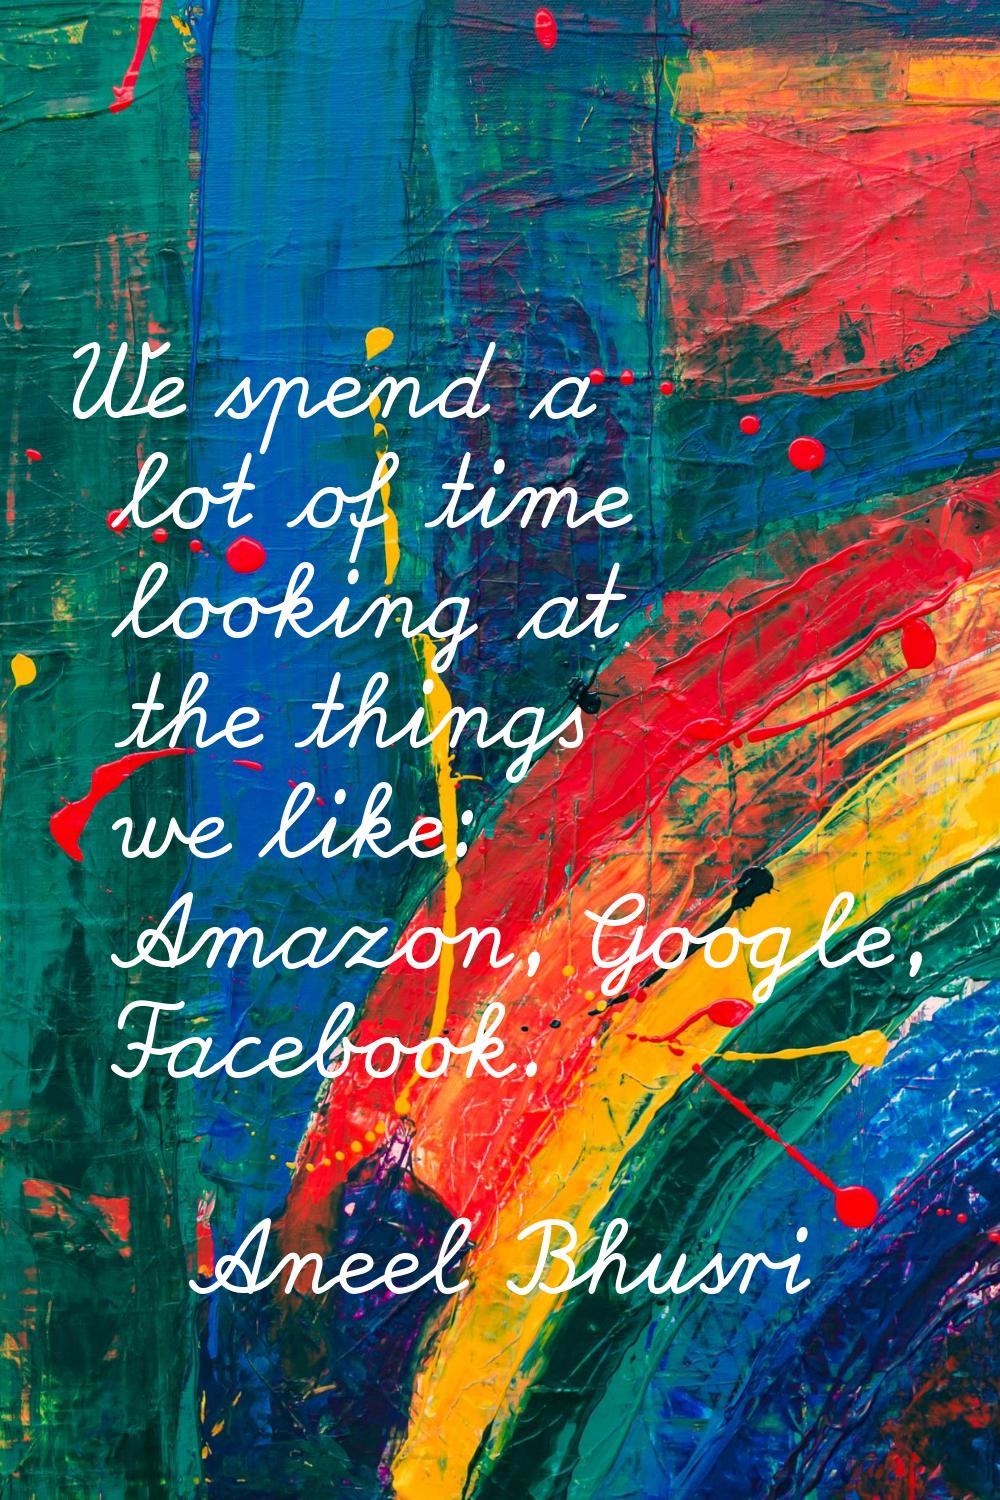 We spend a lot of time looking at the things we like: Amazon, Google, Facebook.